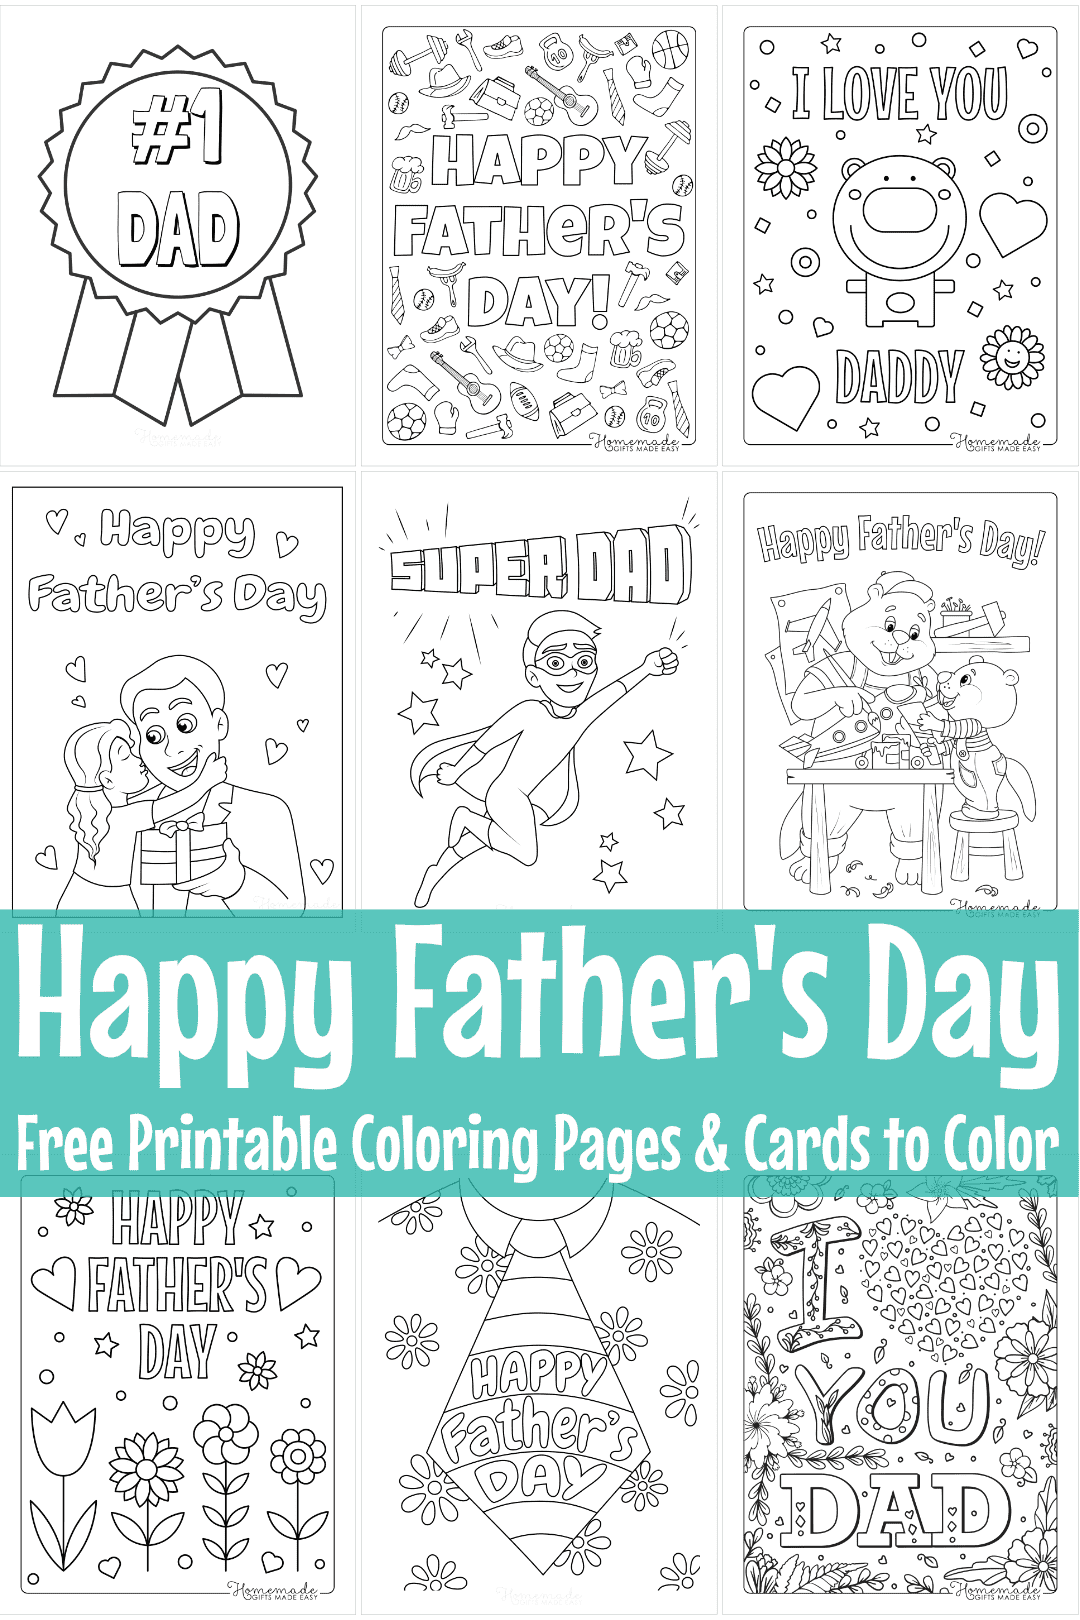 free printable father's day coloring pages